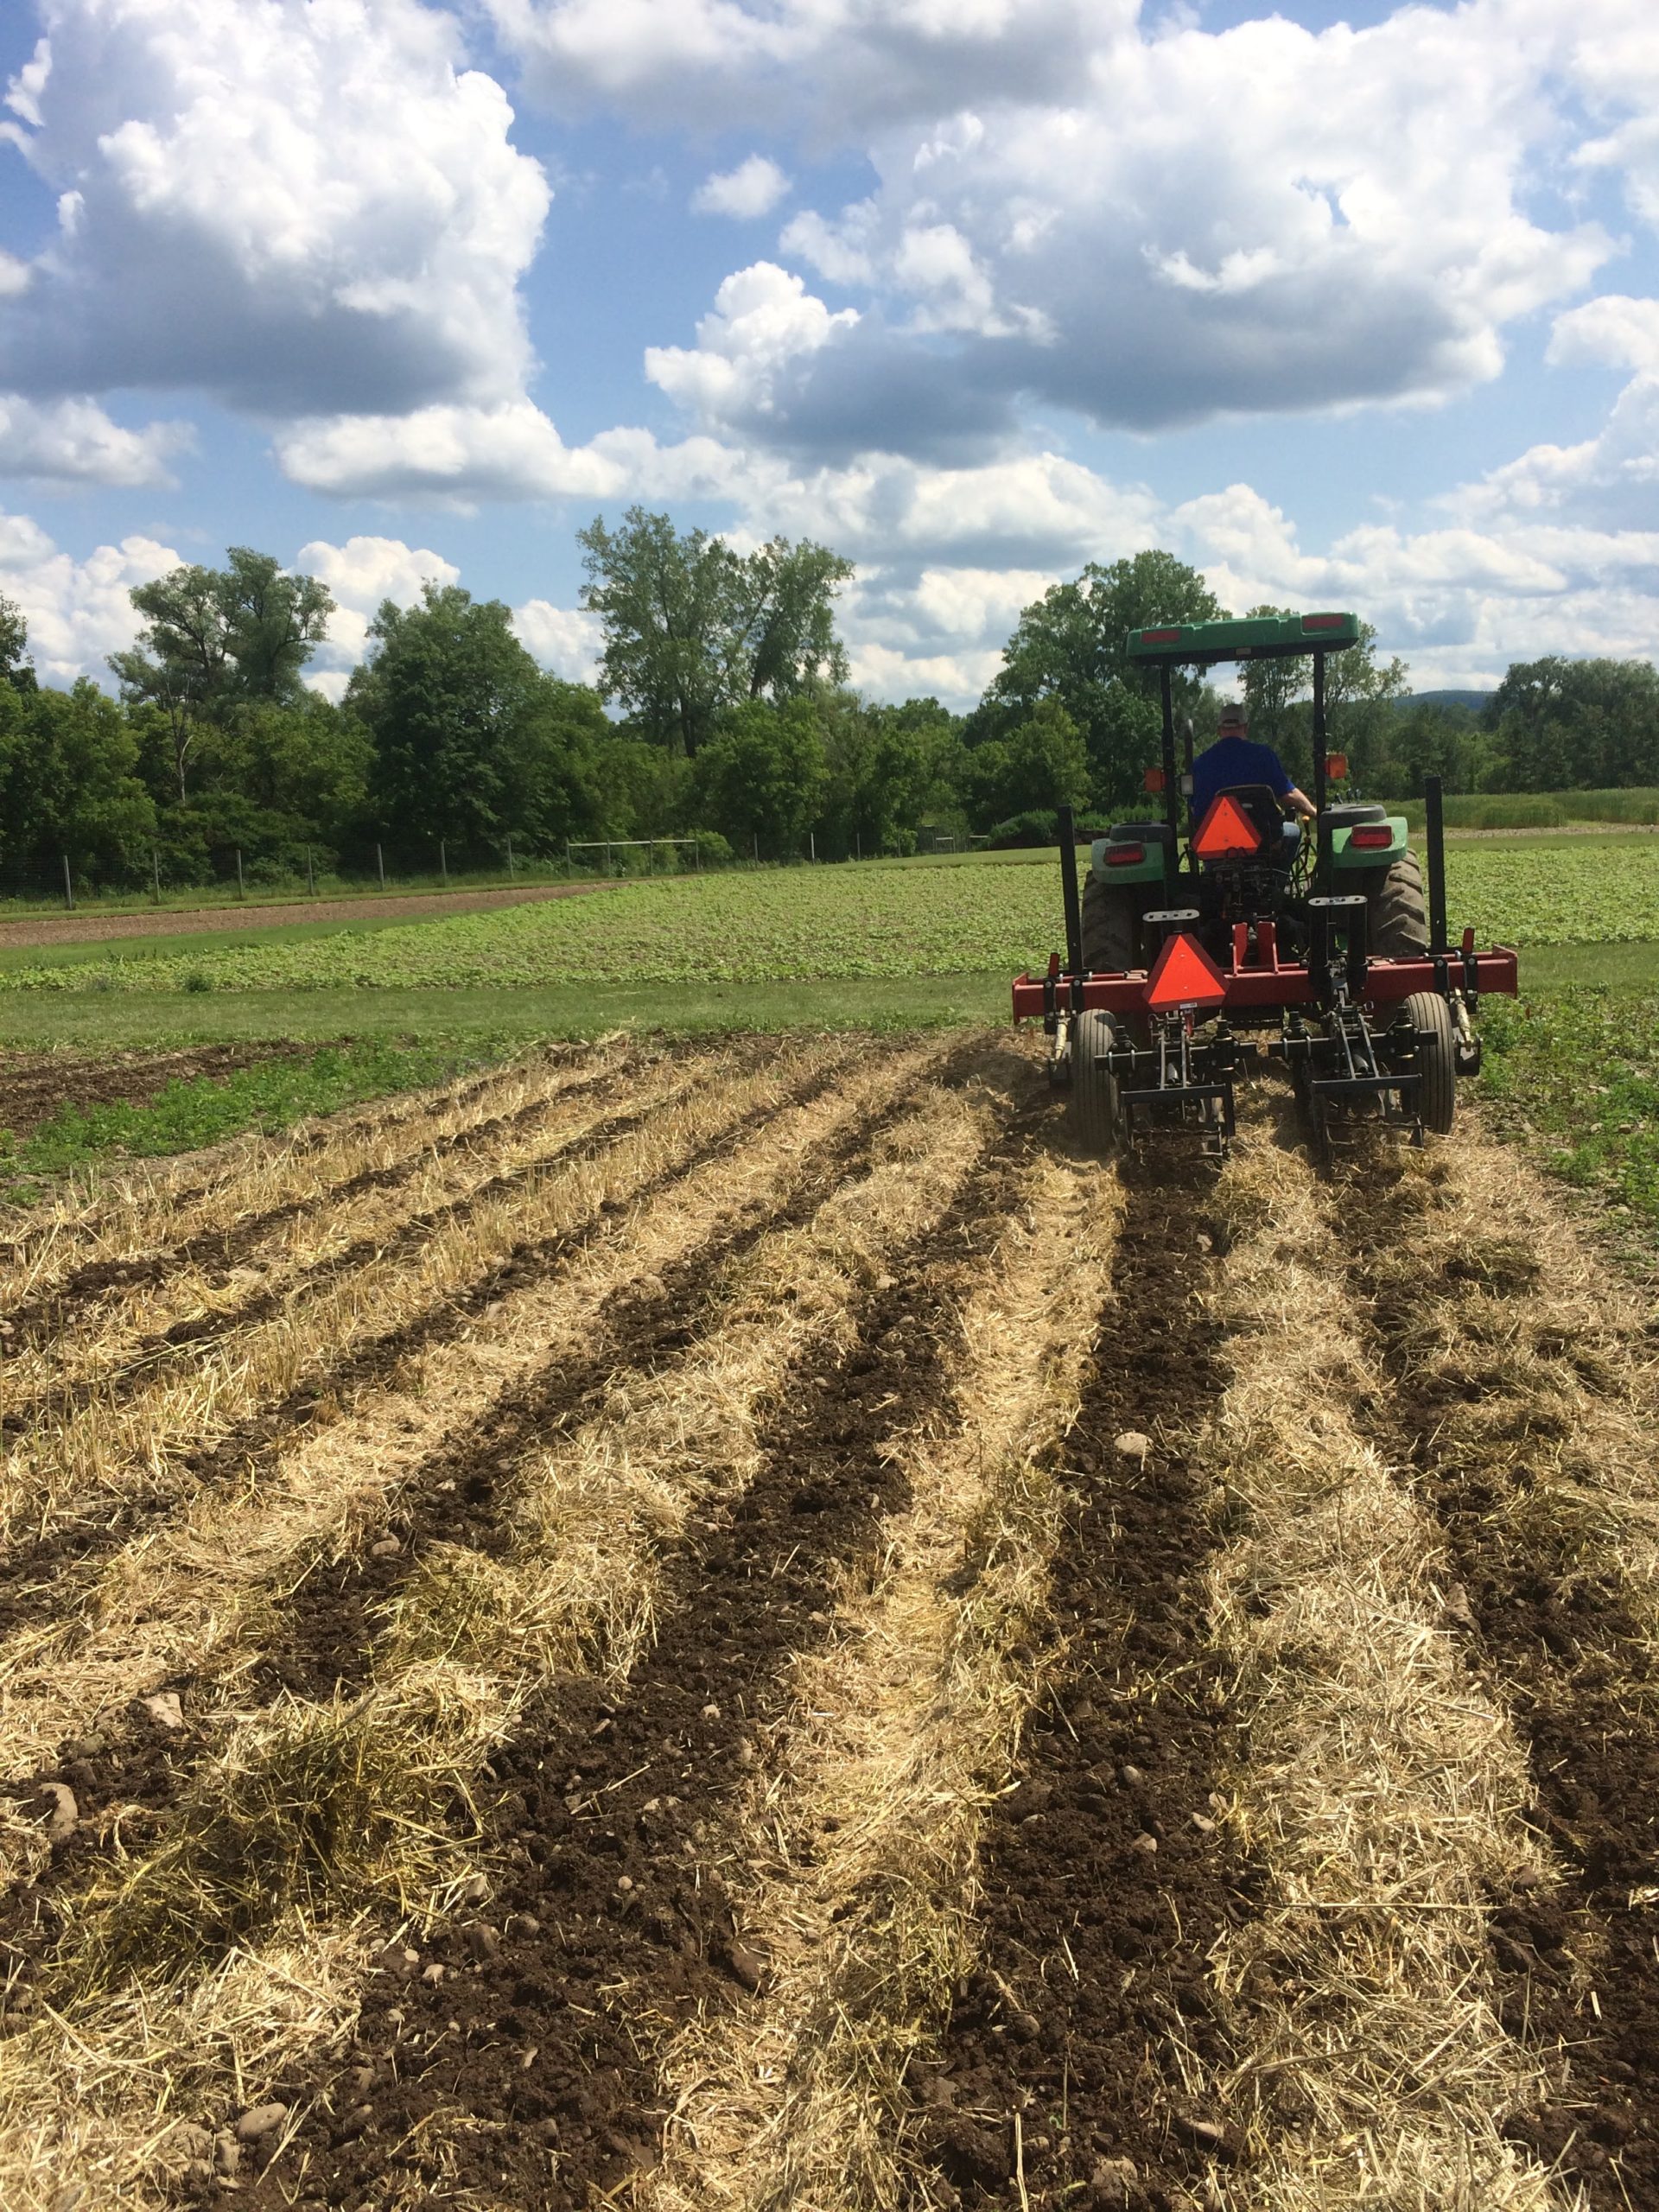 Strip tillage in mowed cereal rye and hairy vetch residue. Equipment can be used to manage residue and prep the soil for planting in one pass.